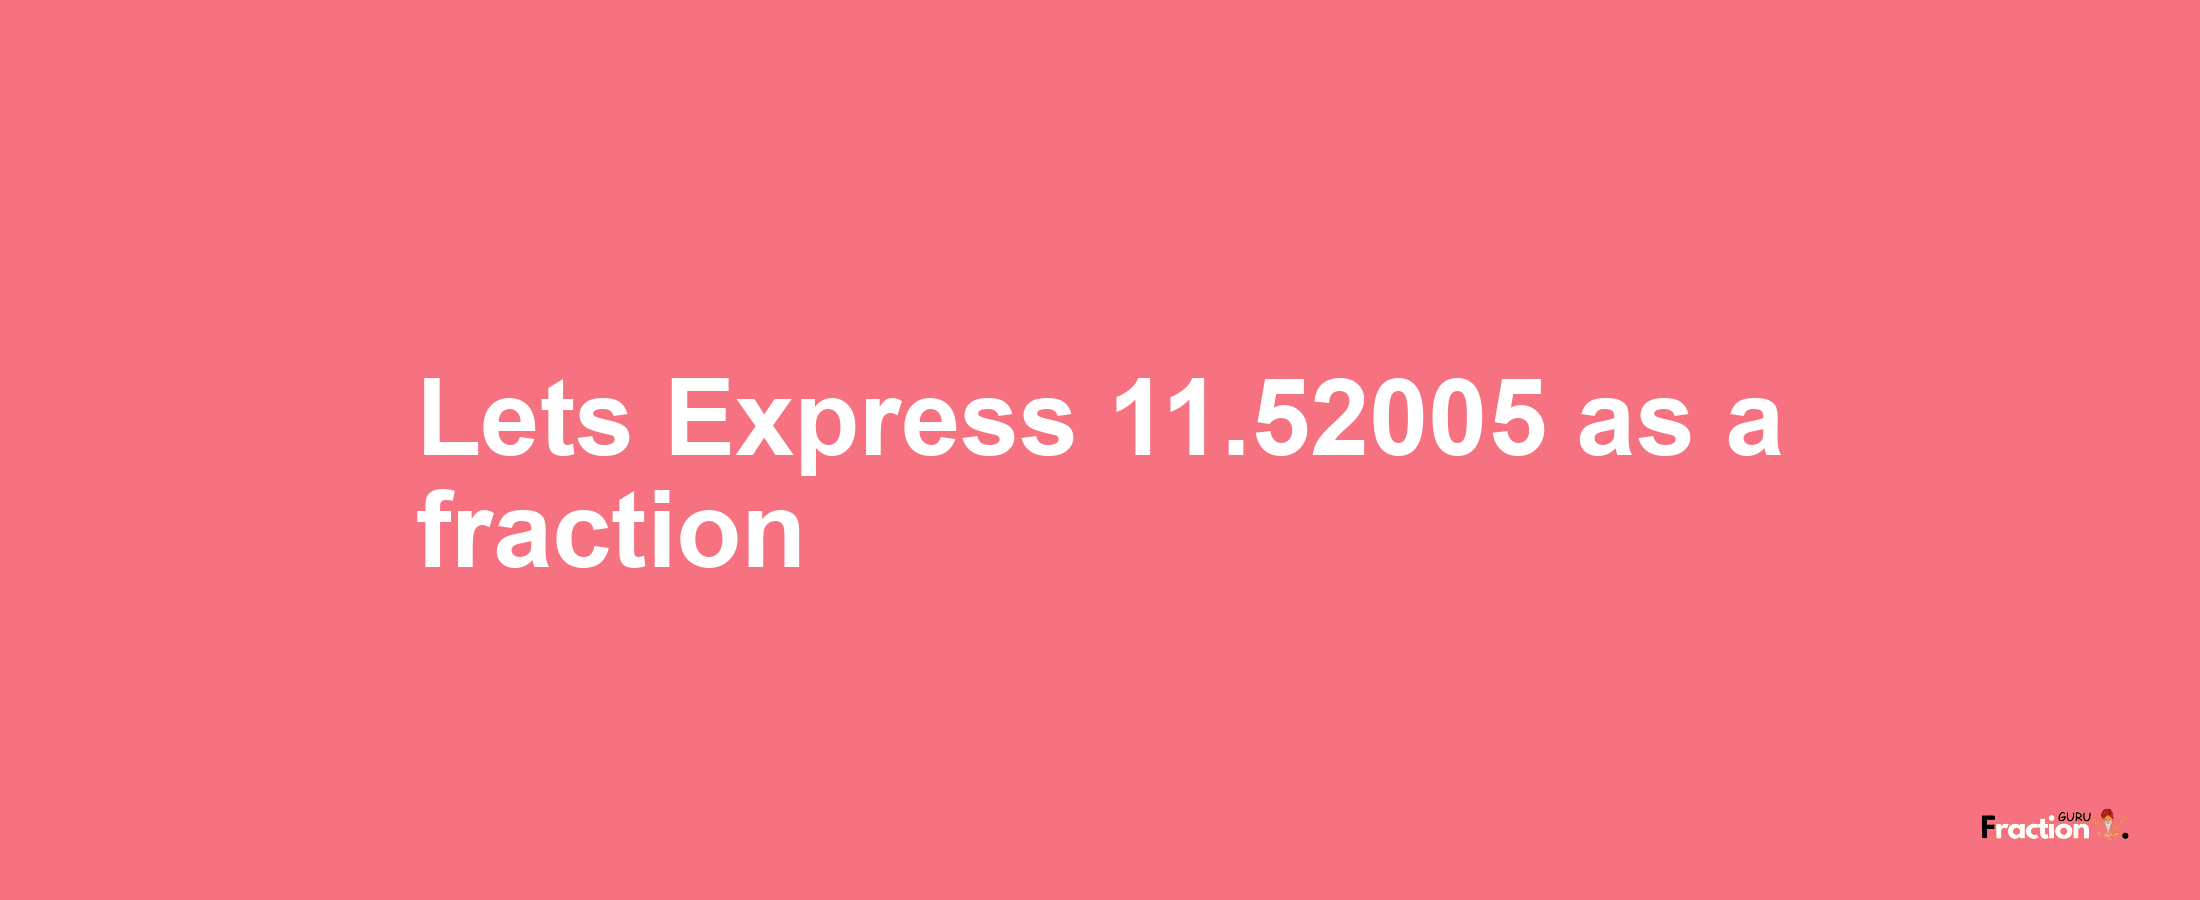 Lets Express 11.52005 as afraction